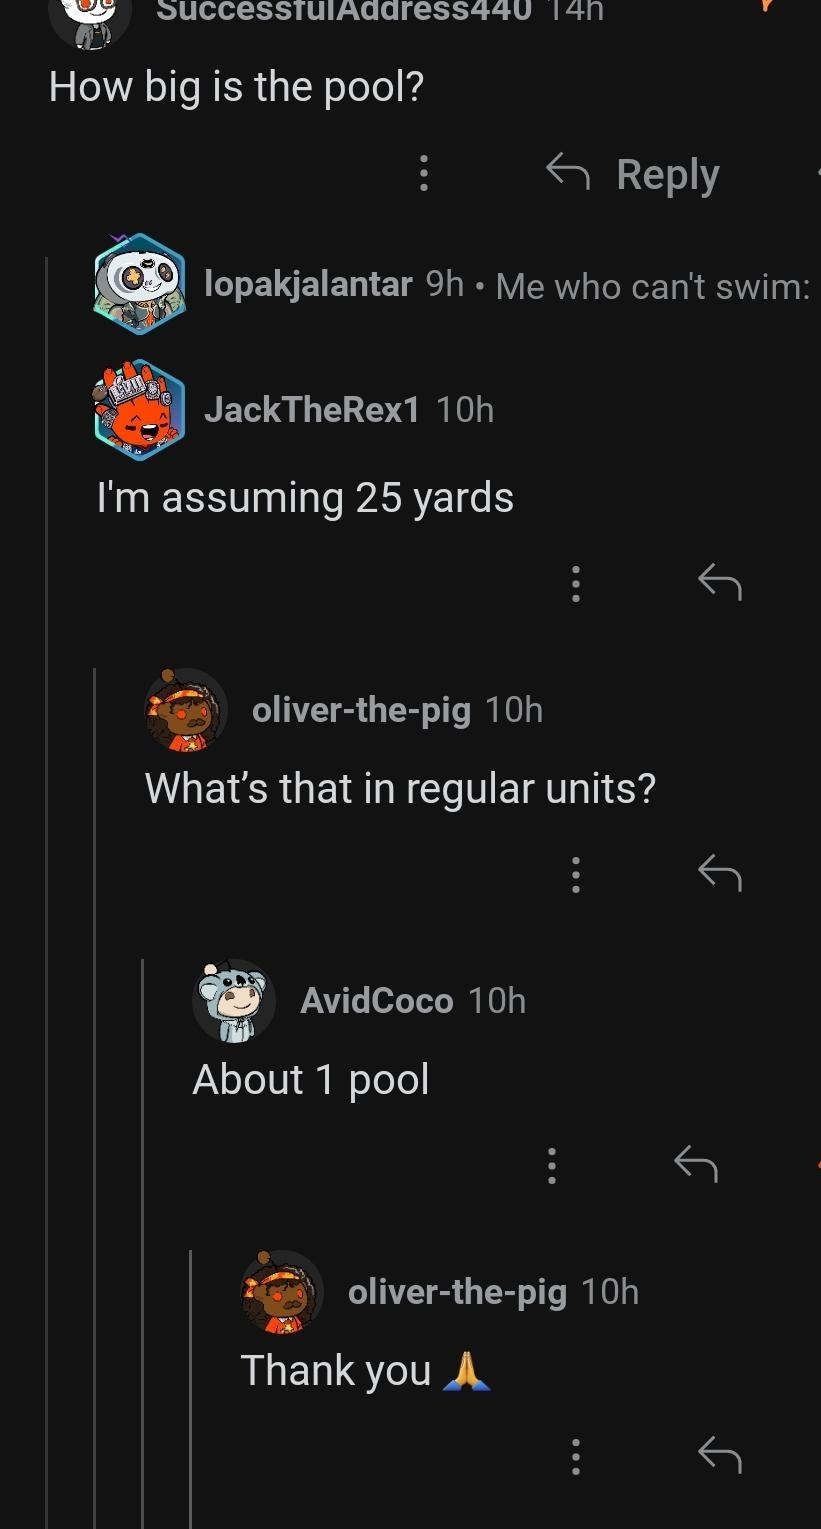 Someone asks how big a pool is, and someone responds about 1 pool size